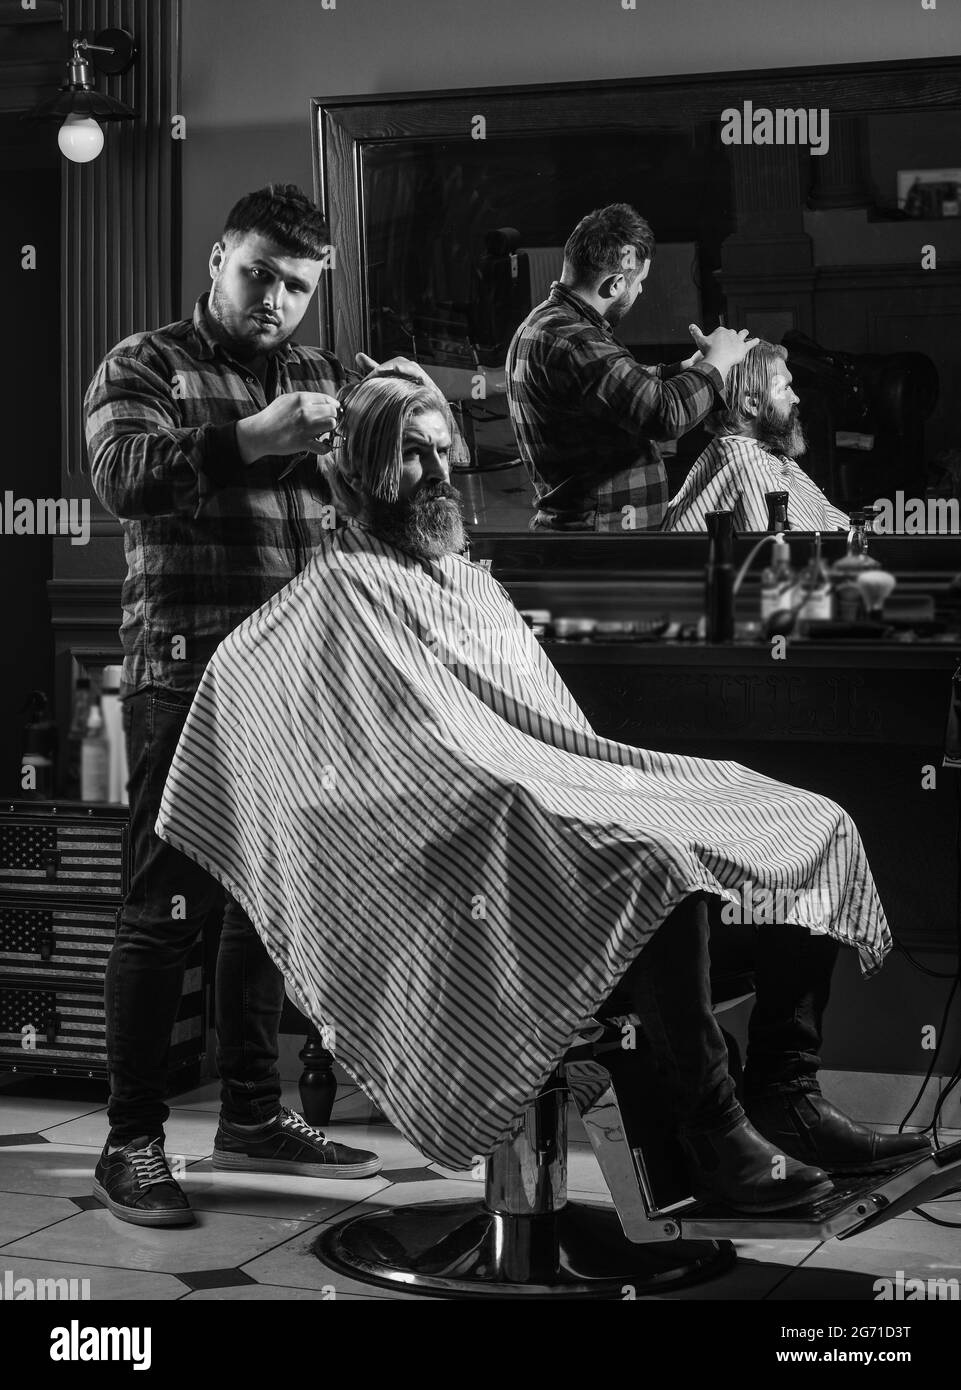 Cut hair. Barber hairstyle barbershop. Professional cosmetics. Hipster getting haircut. Healthy hair. Annoy barber could turn out poorly for your ear Stock Photo